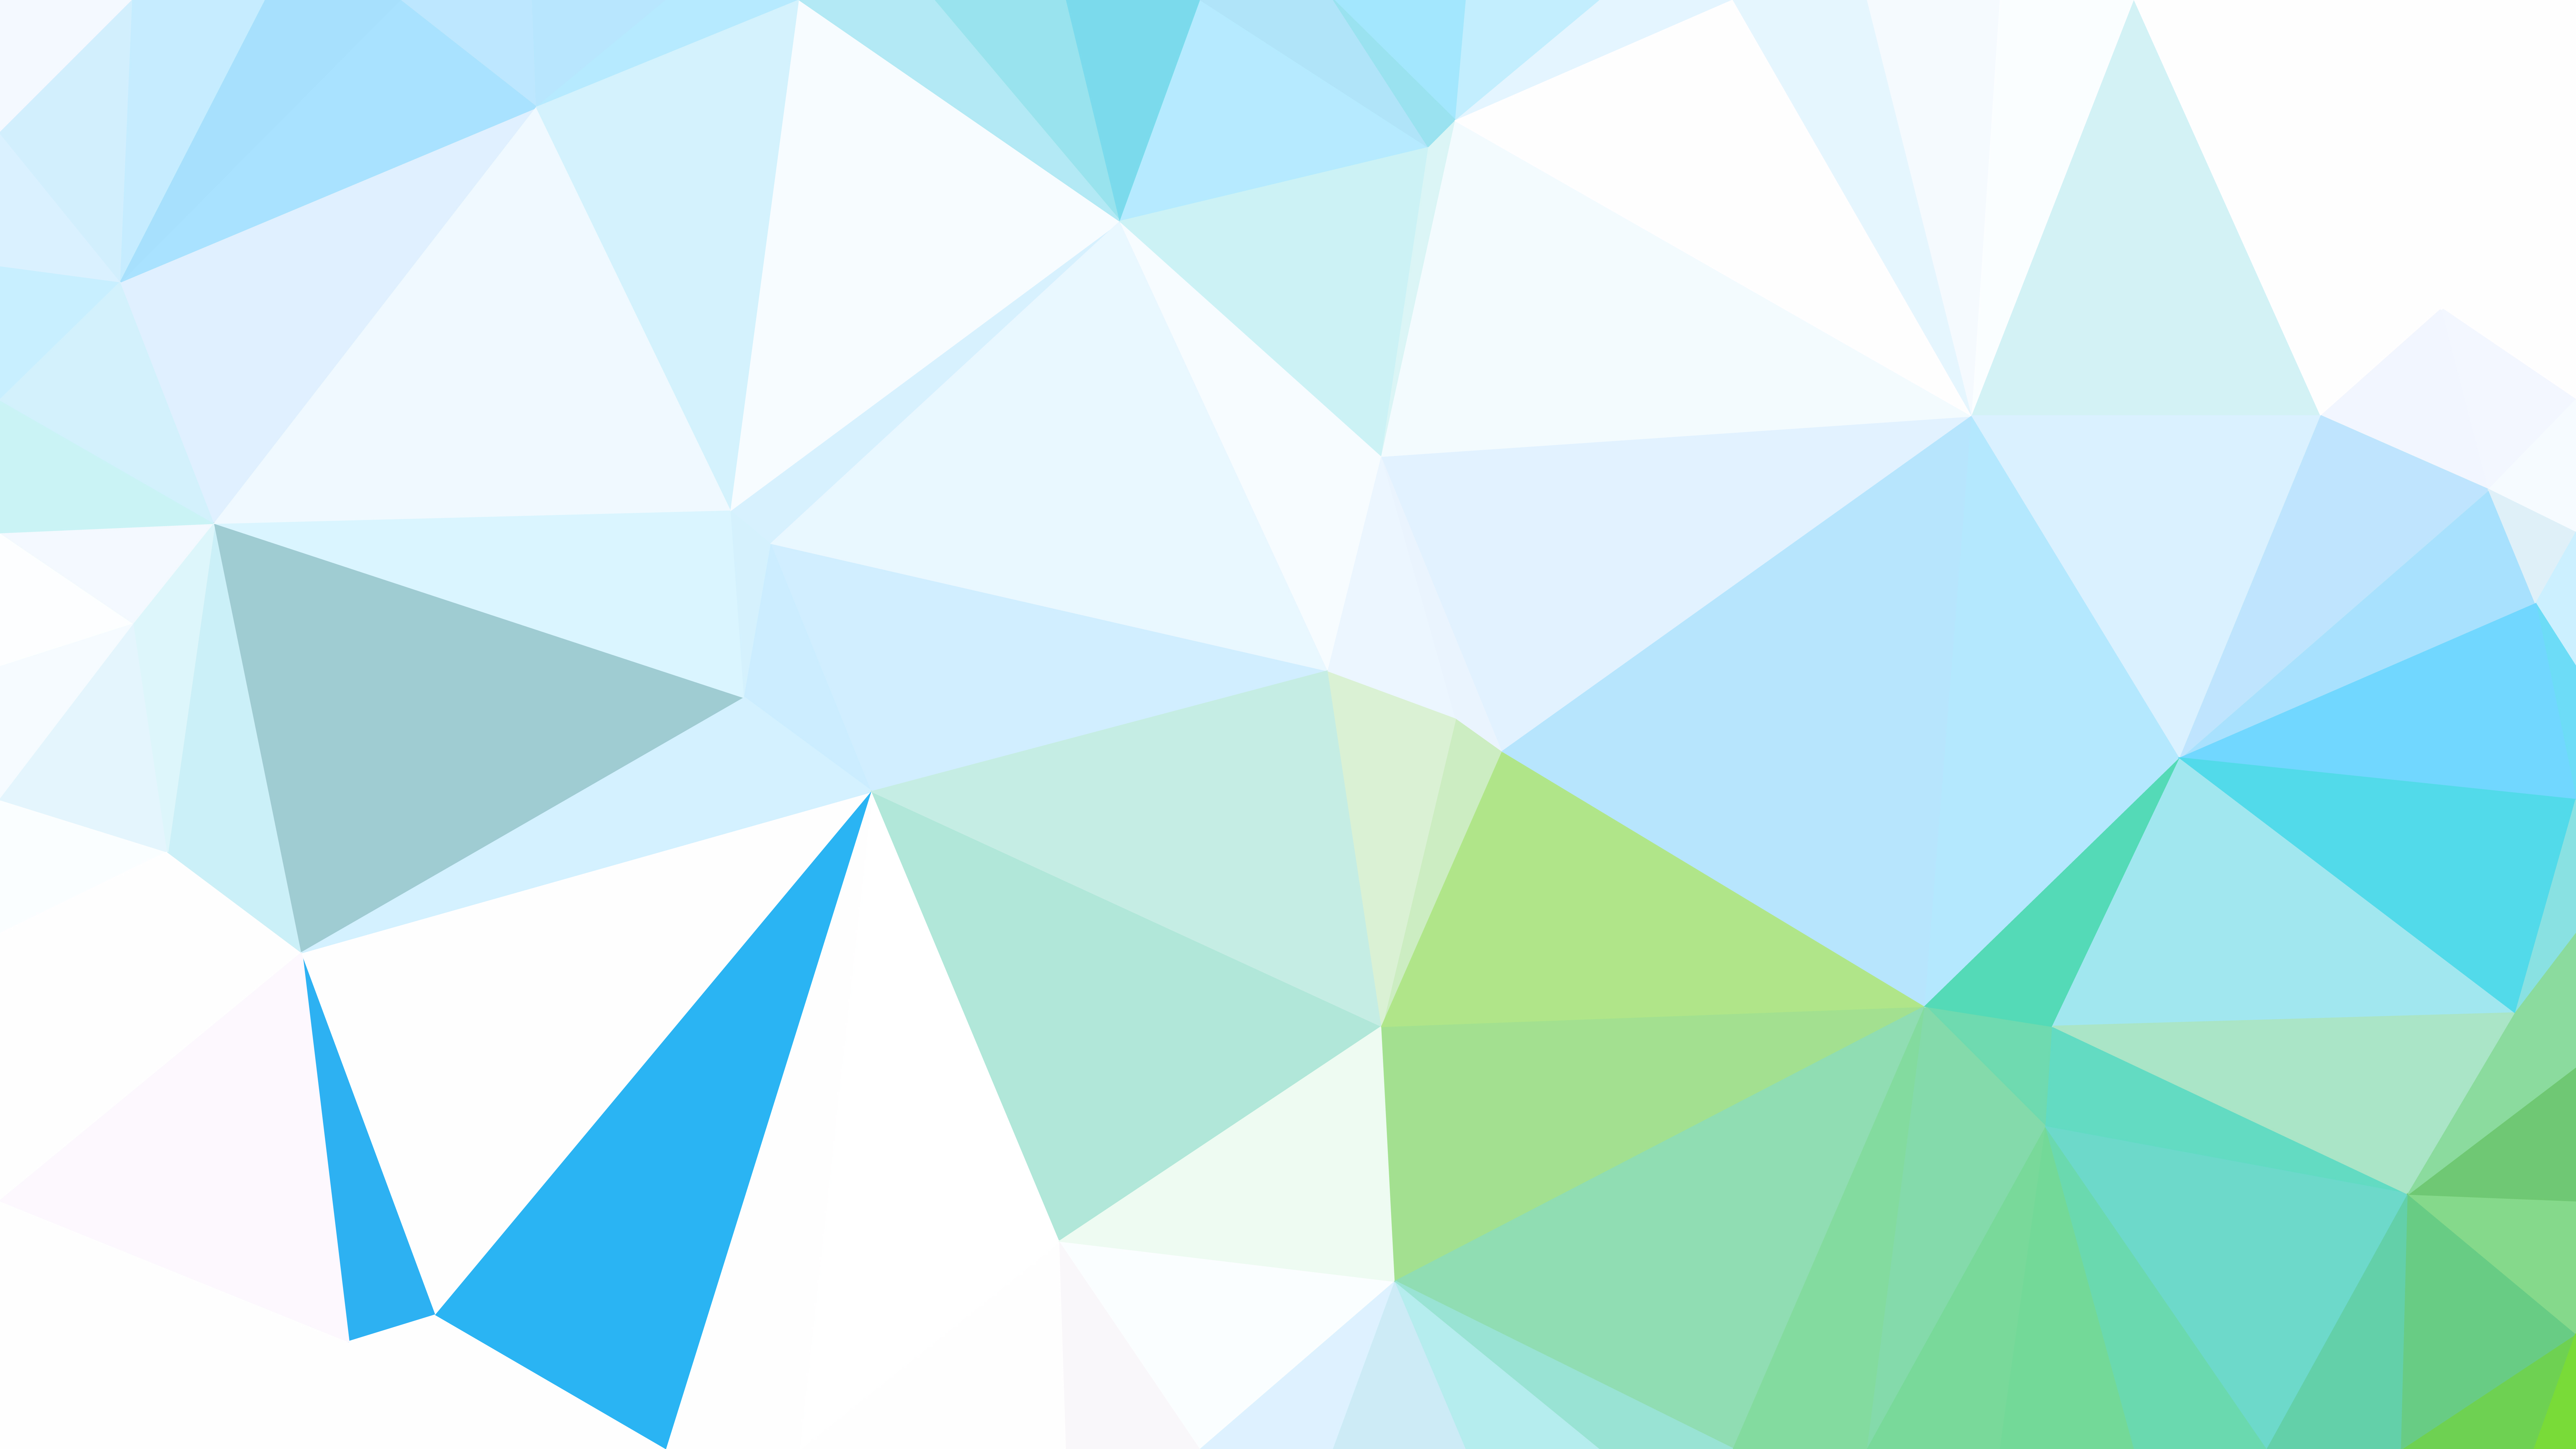 Free Blue Green And White Low Poly Abstract Background Design Illustrator